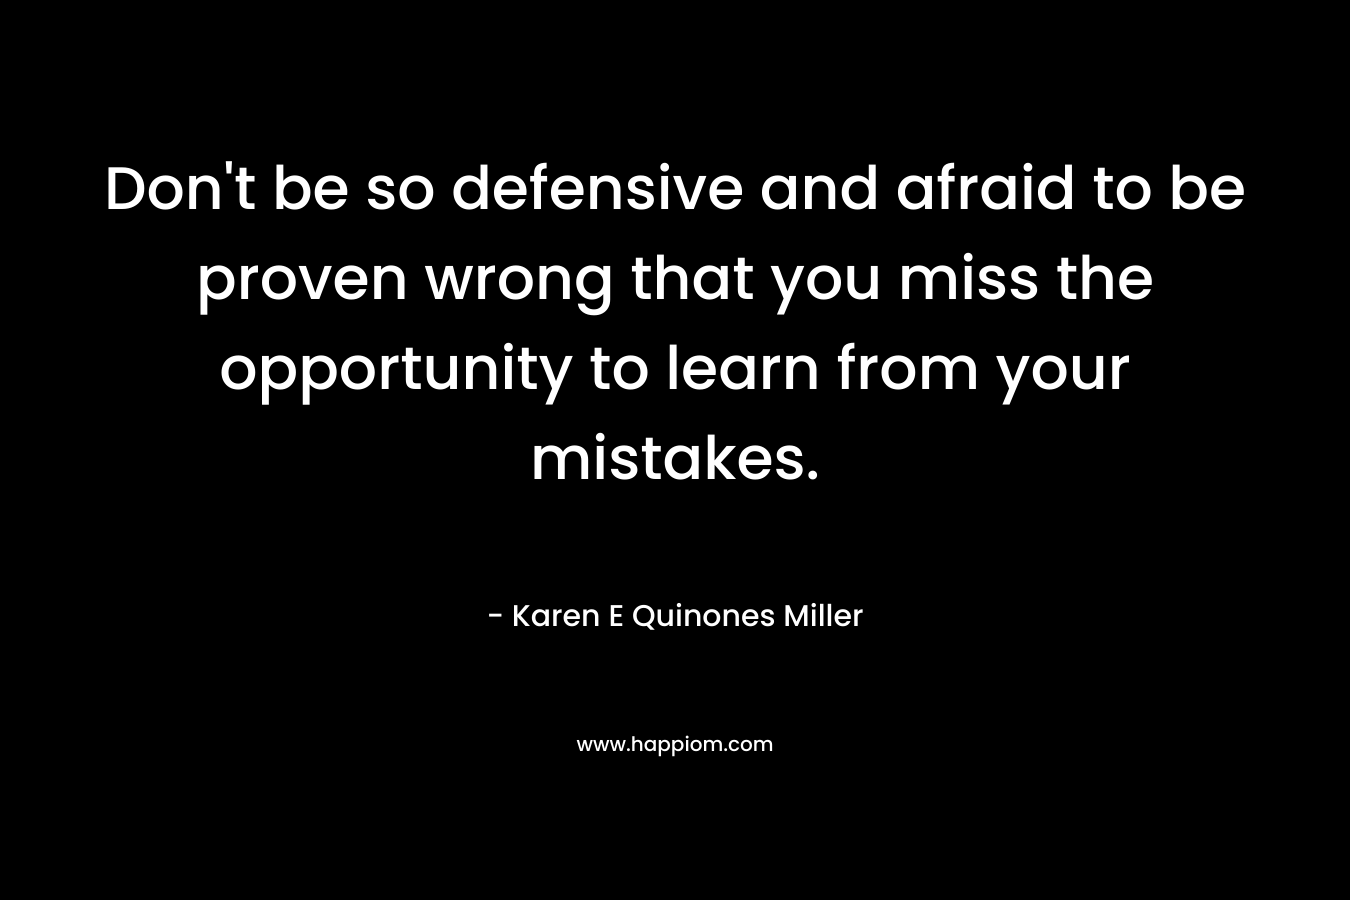 Don't be so defensive and afraid to be proven wrong that you miss the opportunity to learn from your mistakes.